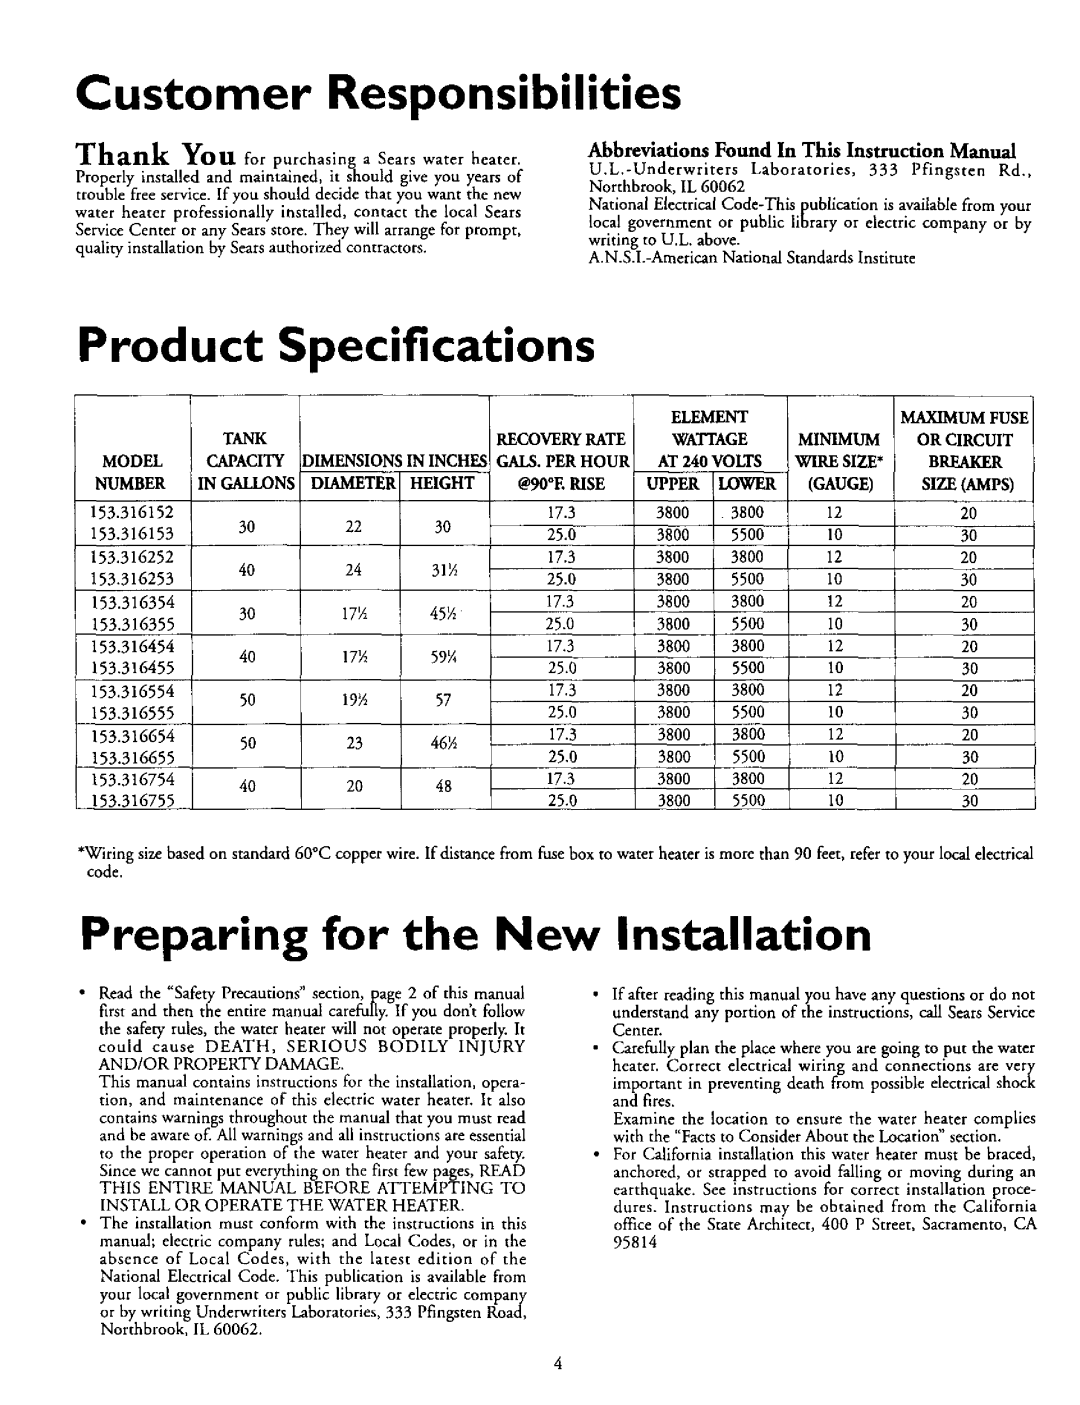 Kenmore 153.316355, 153.316554 Customer Responsibilities, Product, Specifications, Preparing for the New Installation 